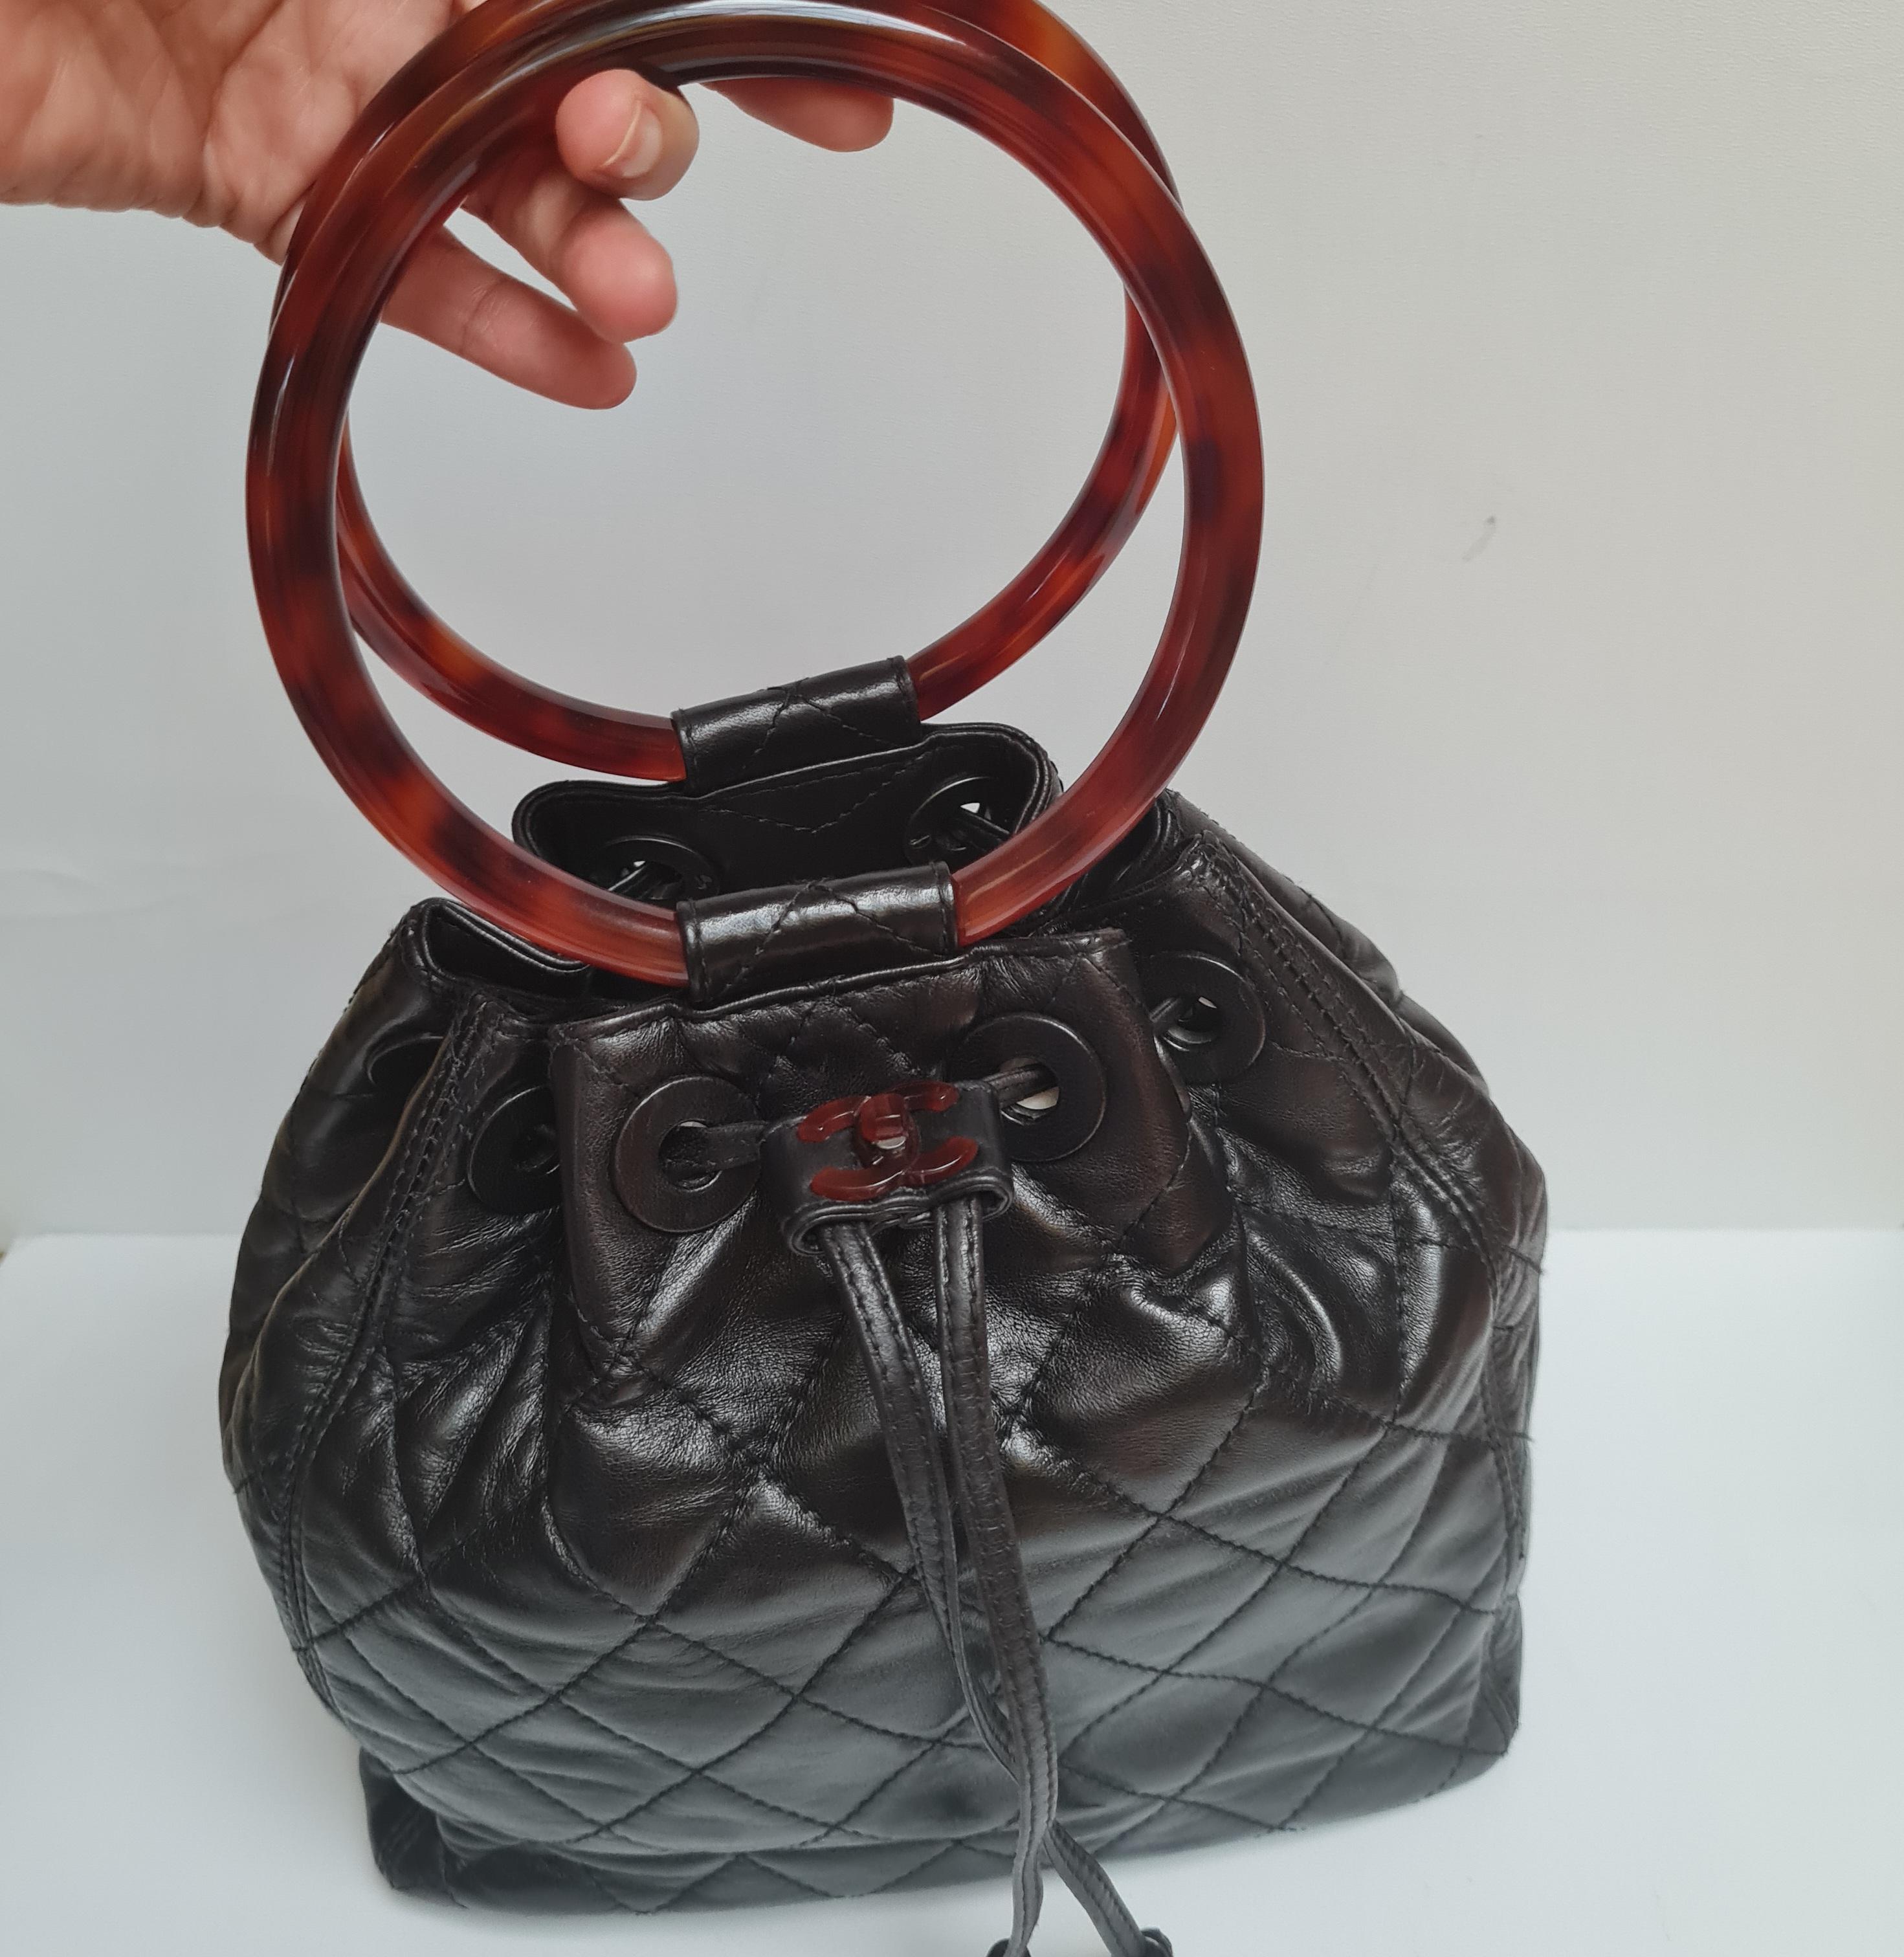 Rare Tortoise Shell Handle Bucket Bag. Soft lambskin quilted bag that's perfect for your everyday bag. Light wrinkling on the leather surface and rubbing on the corners. 

Inclusion: Dust Bag

Serial Number: #4673997 (1996-1997)

Closure: Drawstring